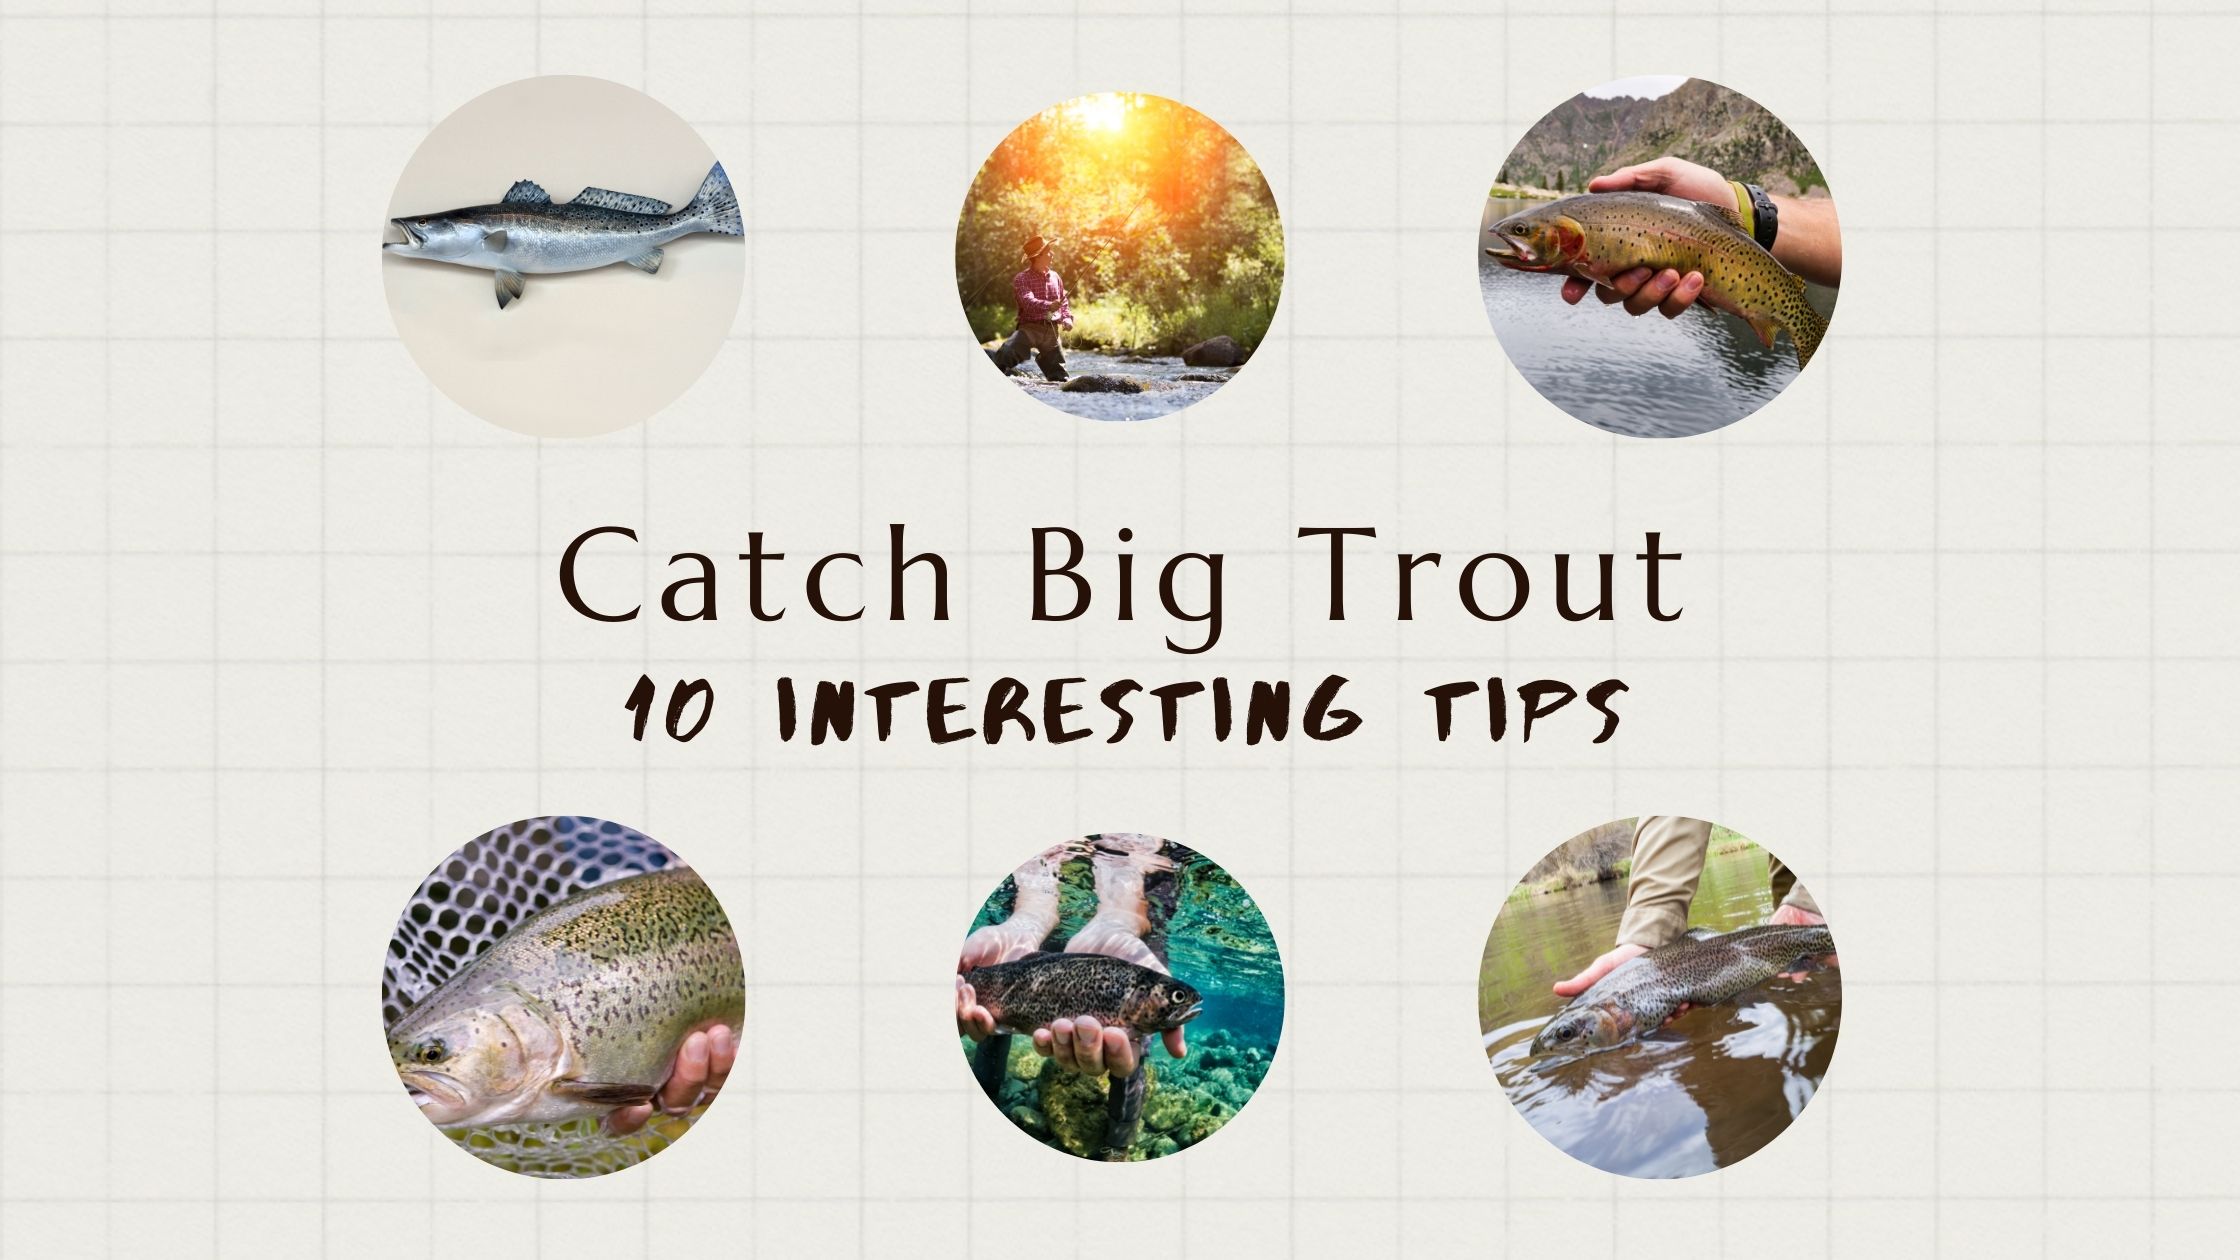 10 Top Tips for Catching Big Trout